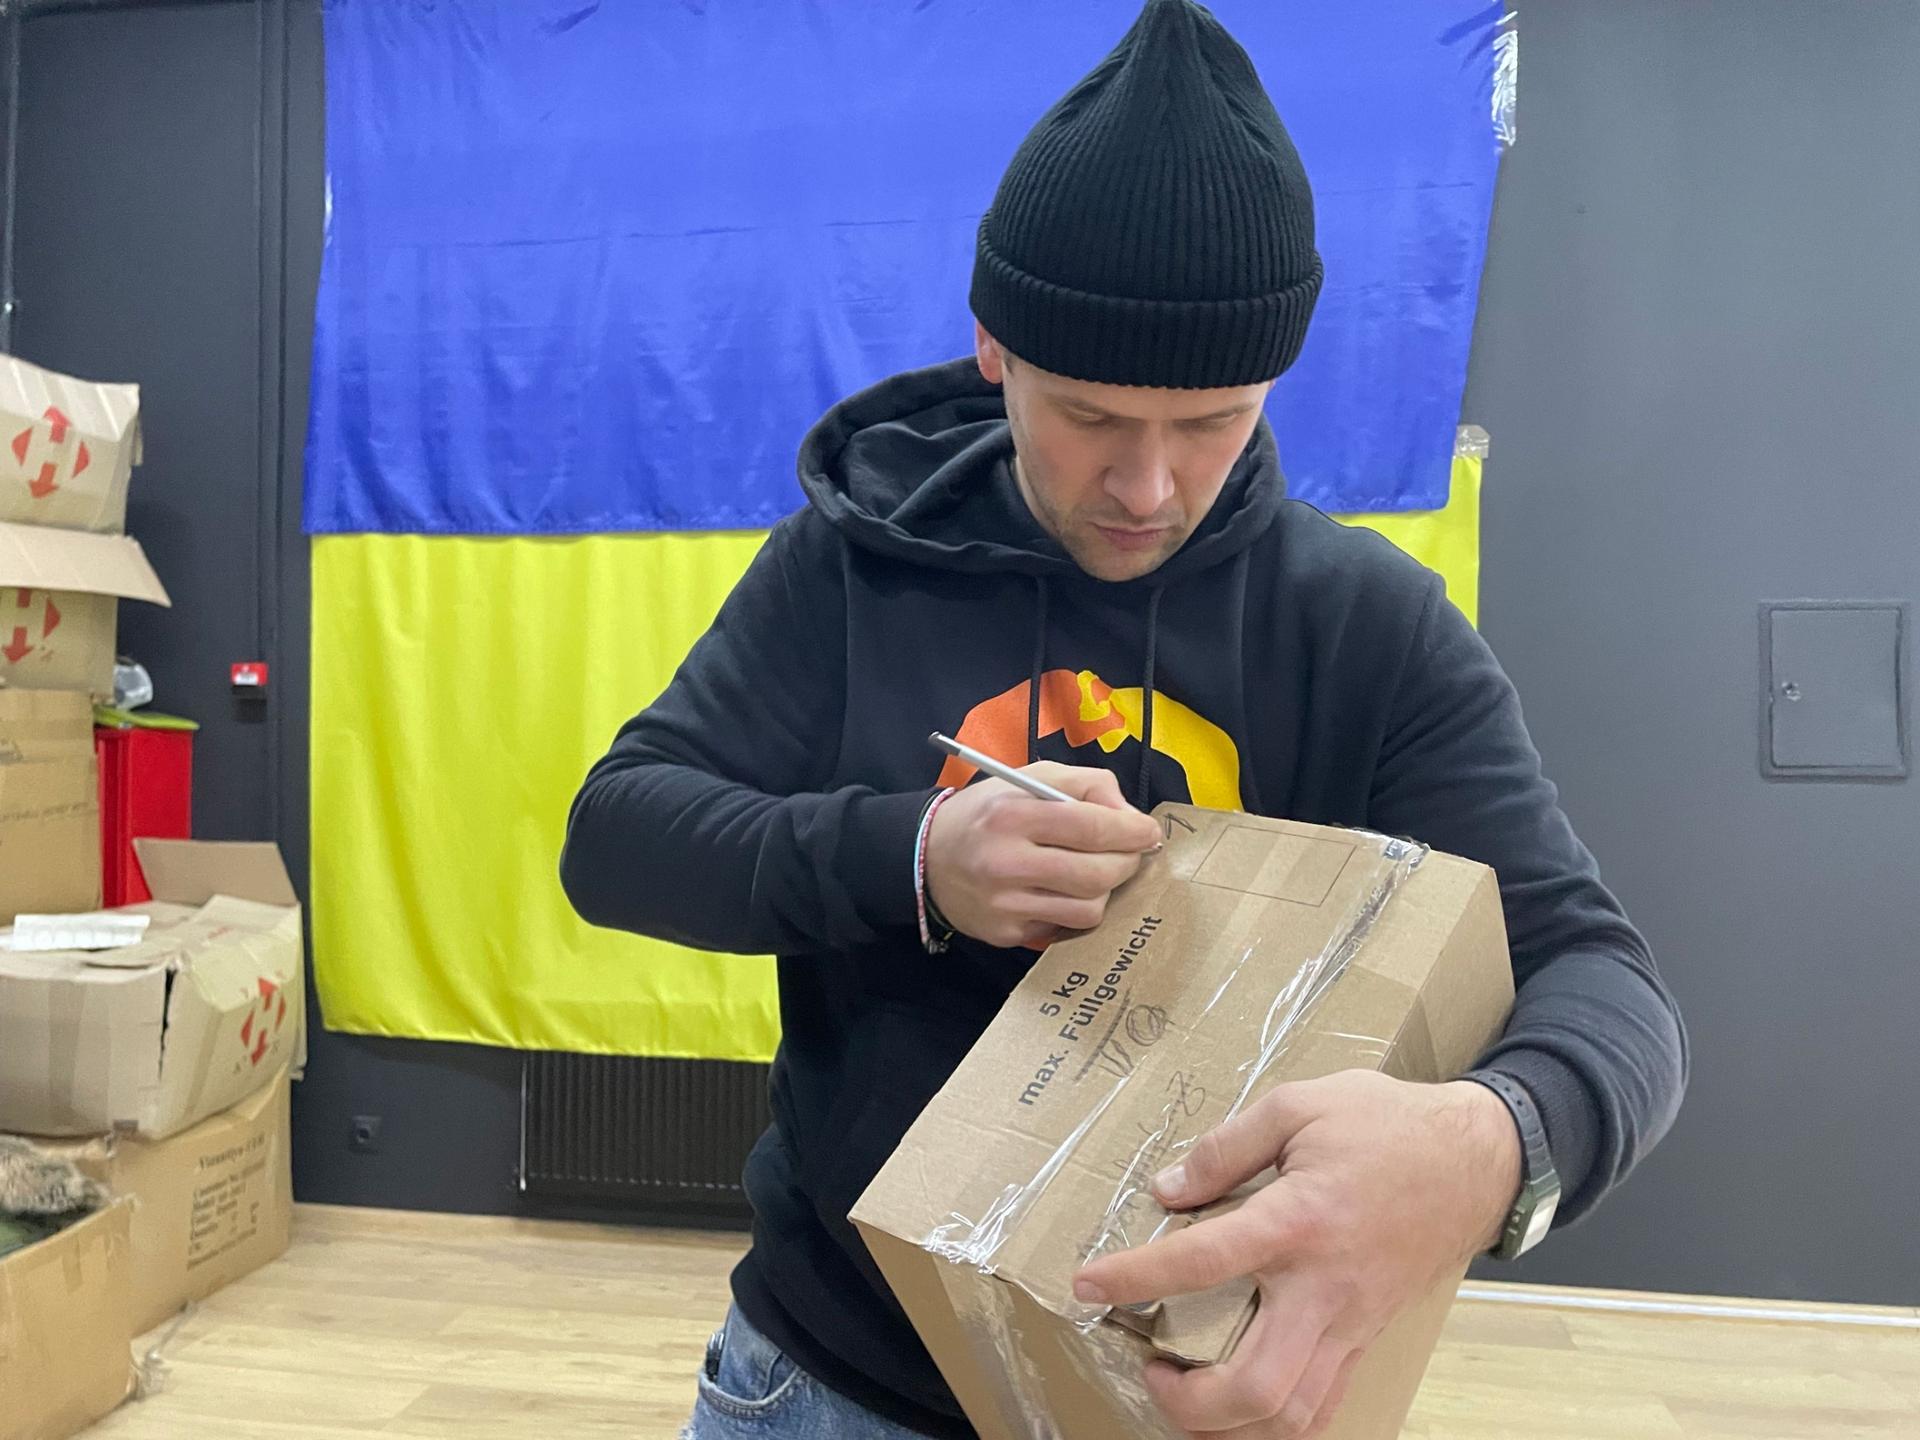 Anton Nesterko is a competitive ballroom dancer and the founder of PoParam, a volunteer organization based in this dance studio in Kyiv, that sends gear like clothing, socks and sleeping bags to Ukrainian soldiers on the fronts lines.